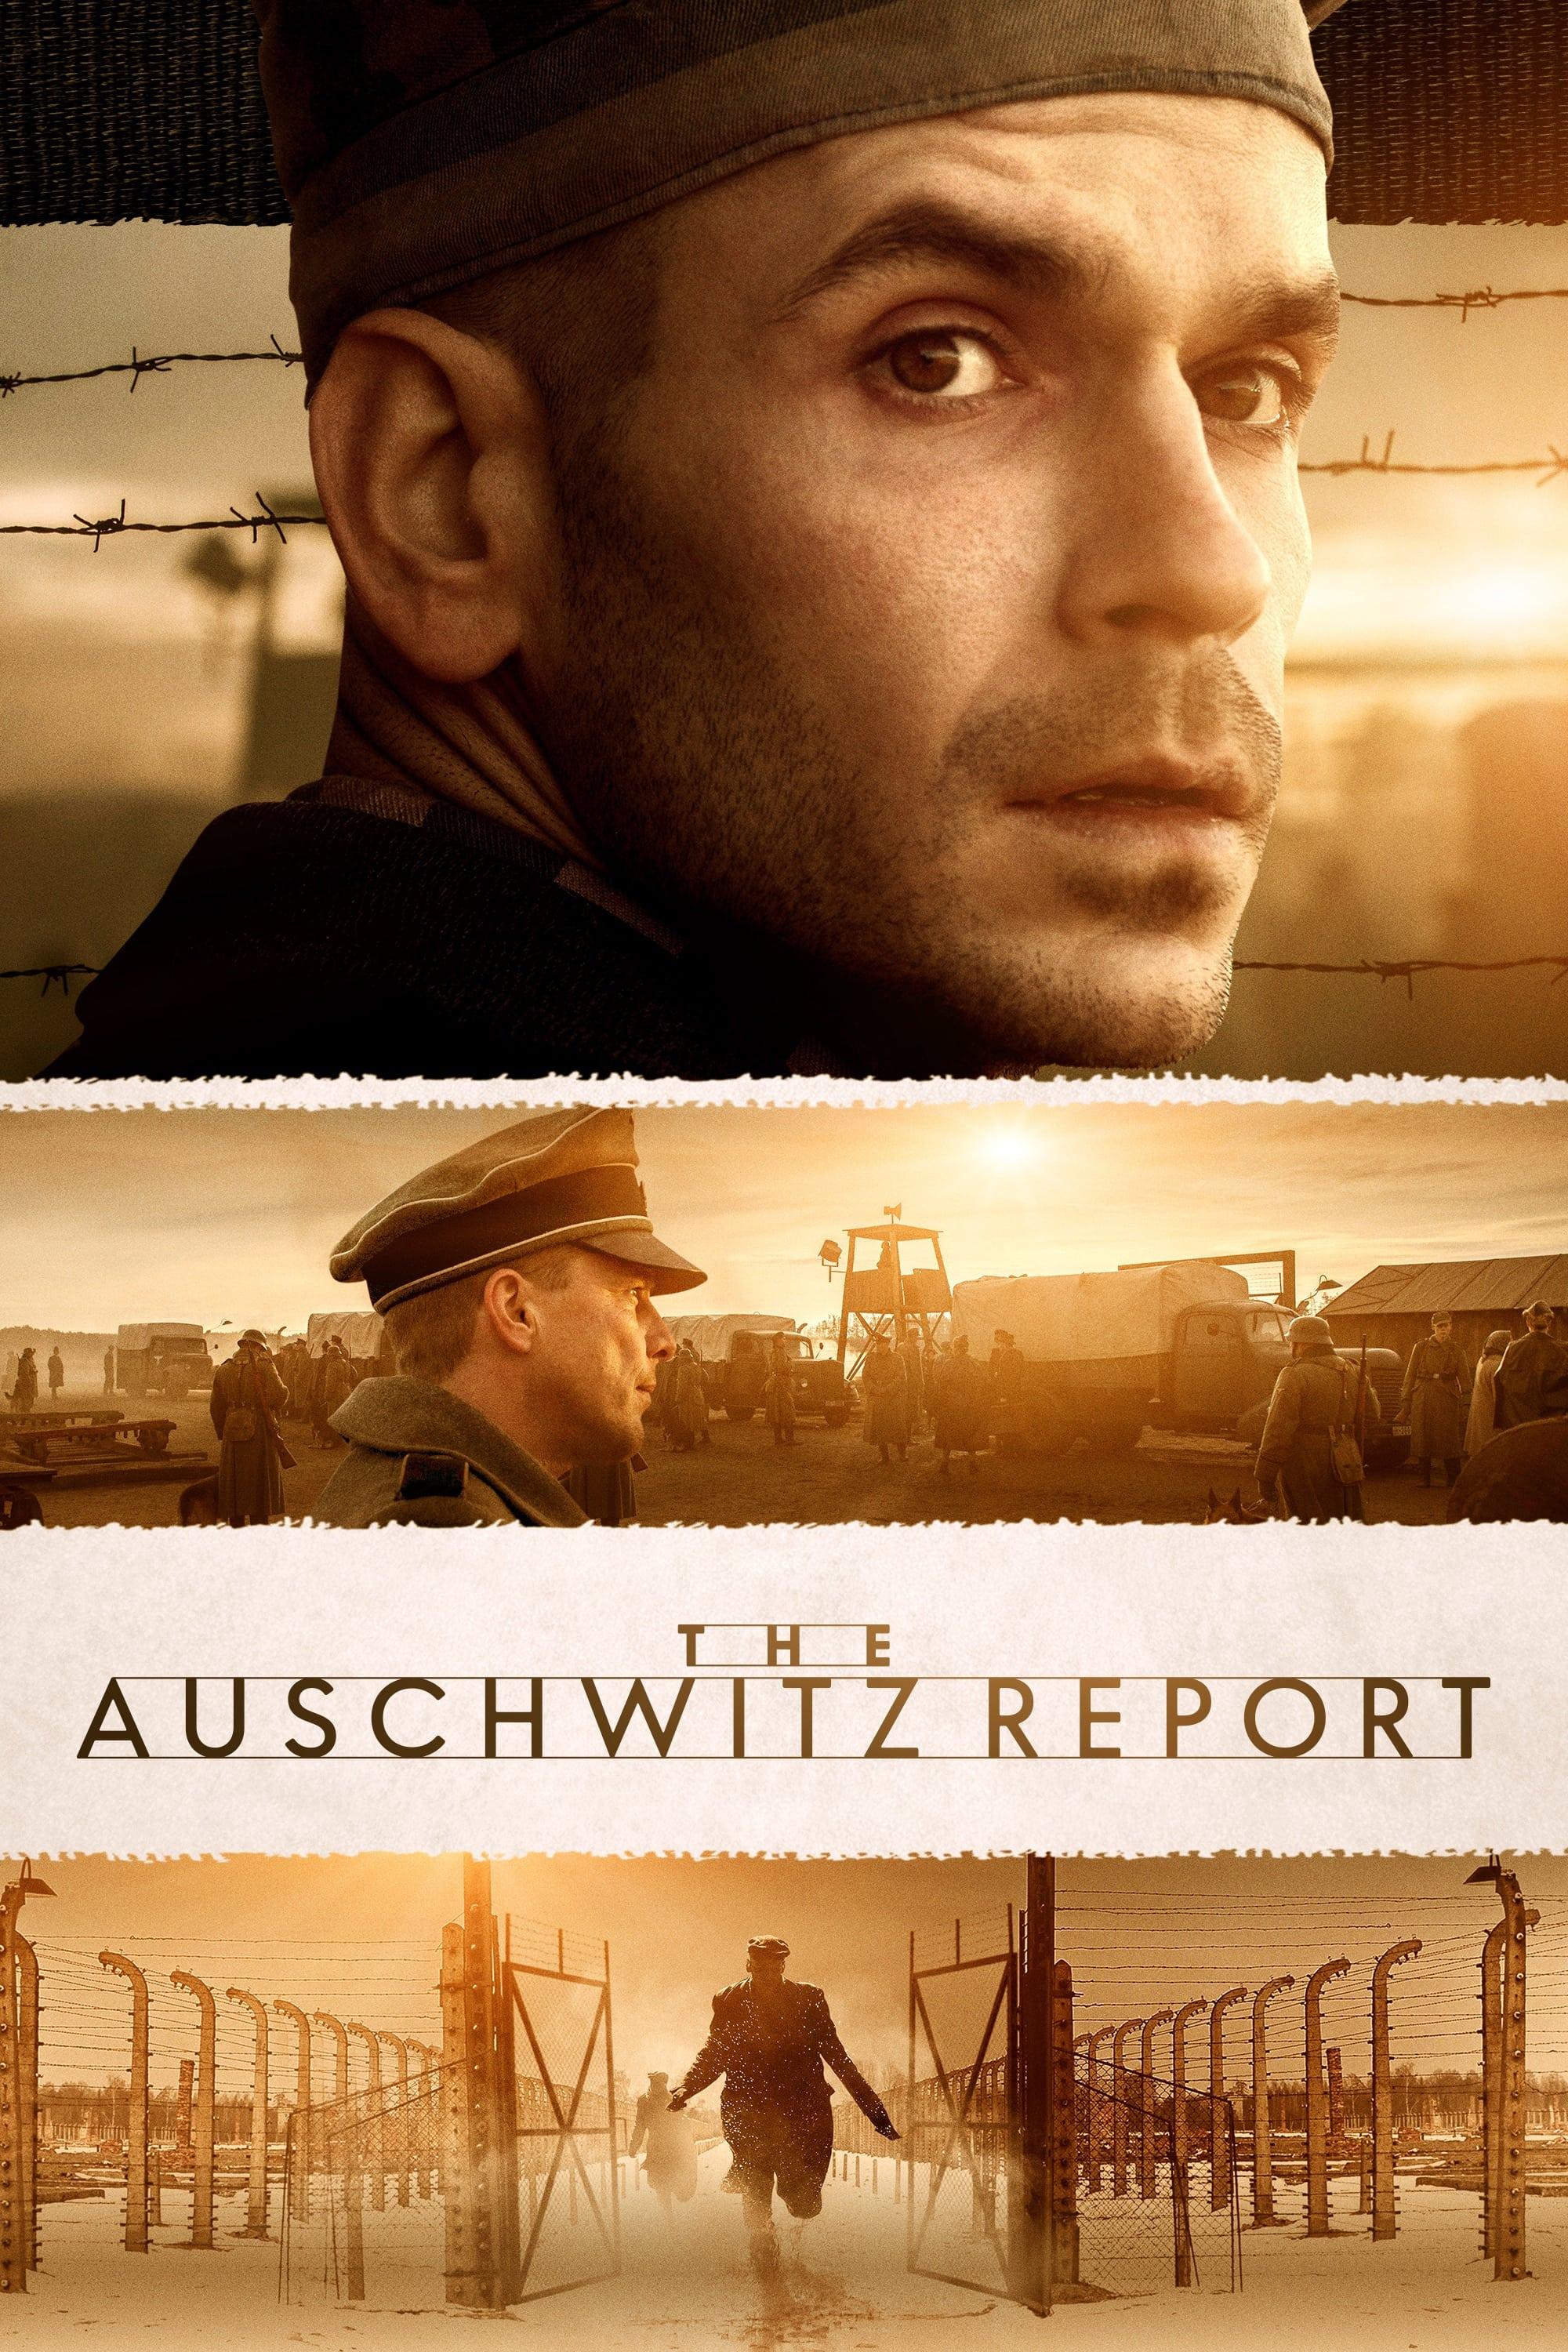 The Auschwitz Report poster